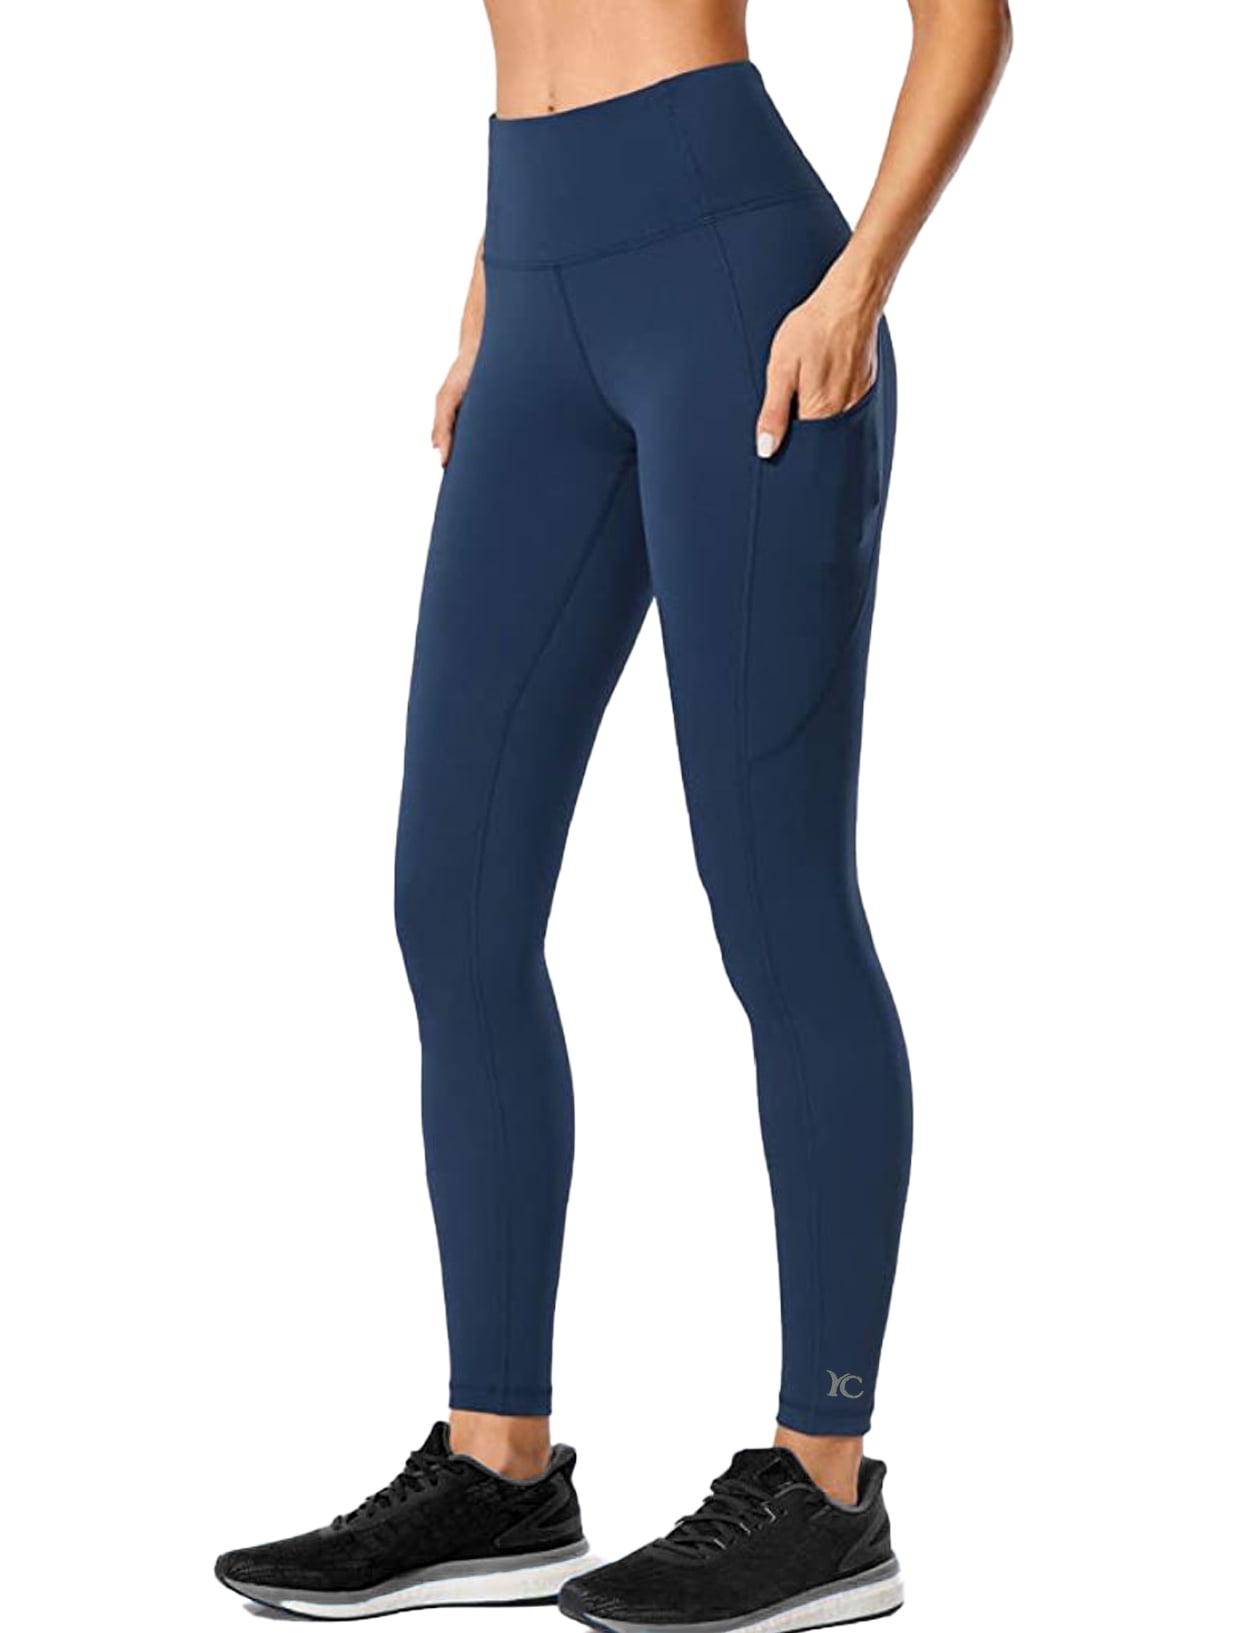 Women's Sportswear Microfiber Leggings in Black with High-Waisted,  Contouring and Firming Effect - ARMONIKA - Invertika